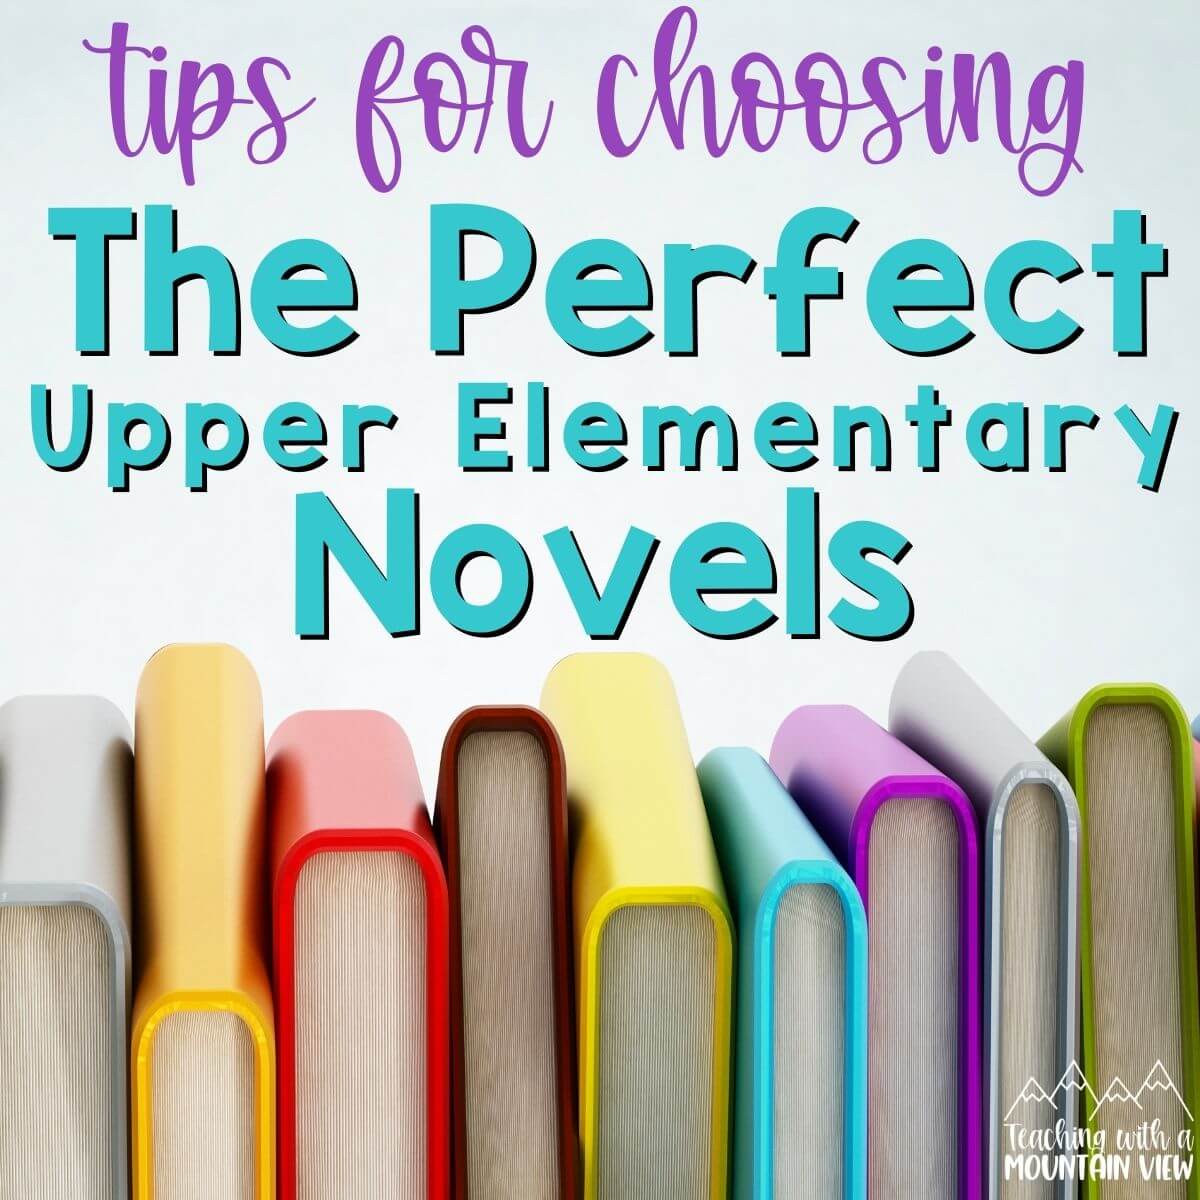 There are many amazing books to read, but which ones should make the cut? Here are my best tips for how to select novels in upper elementary.